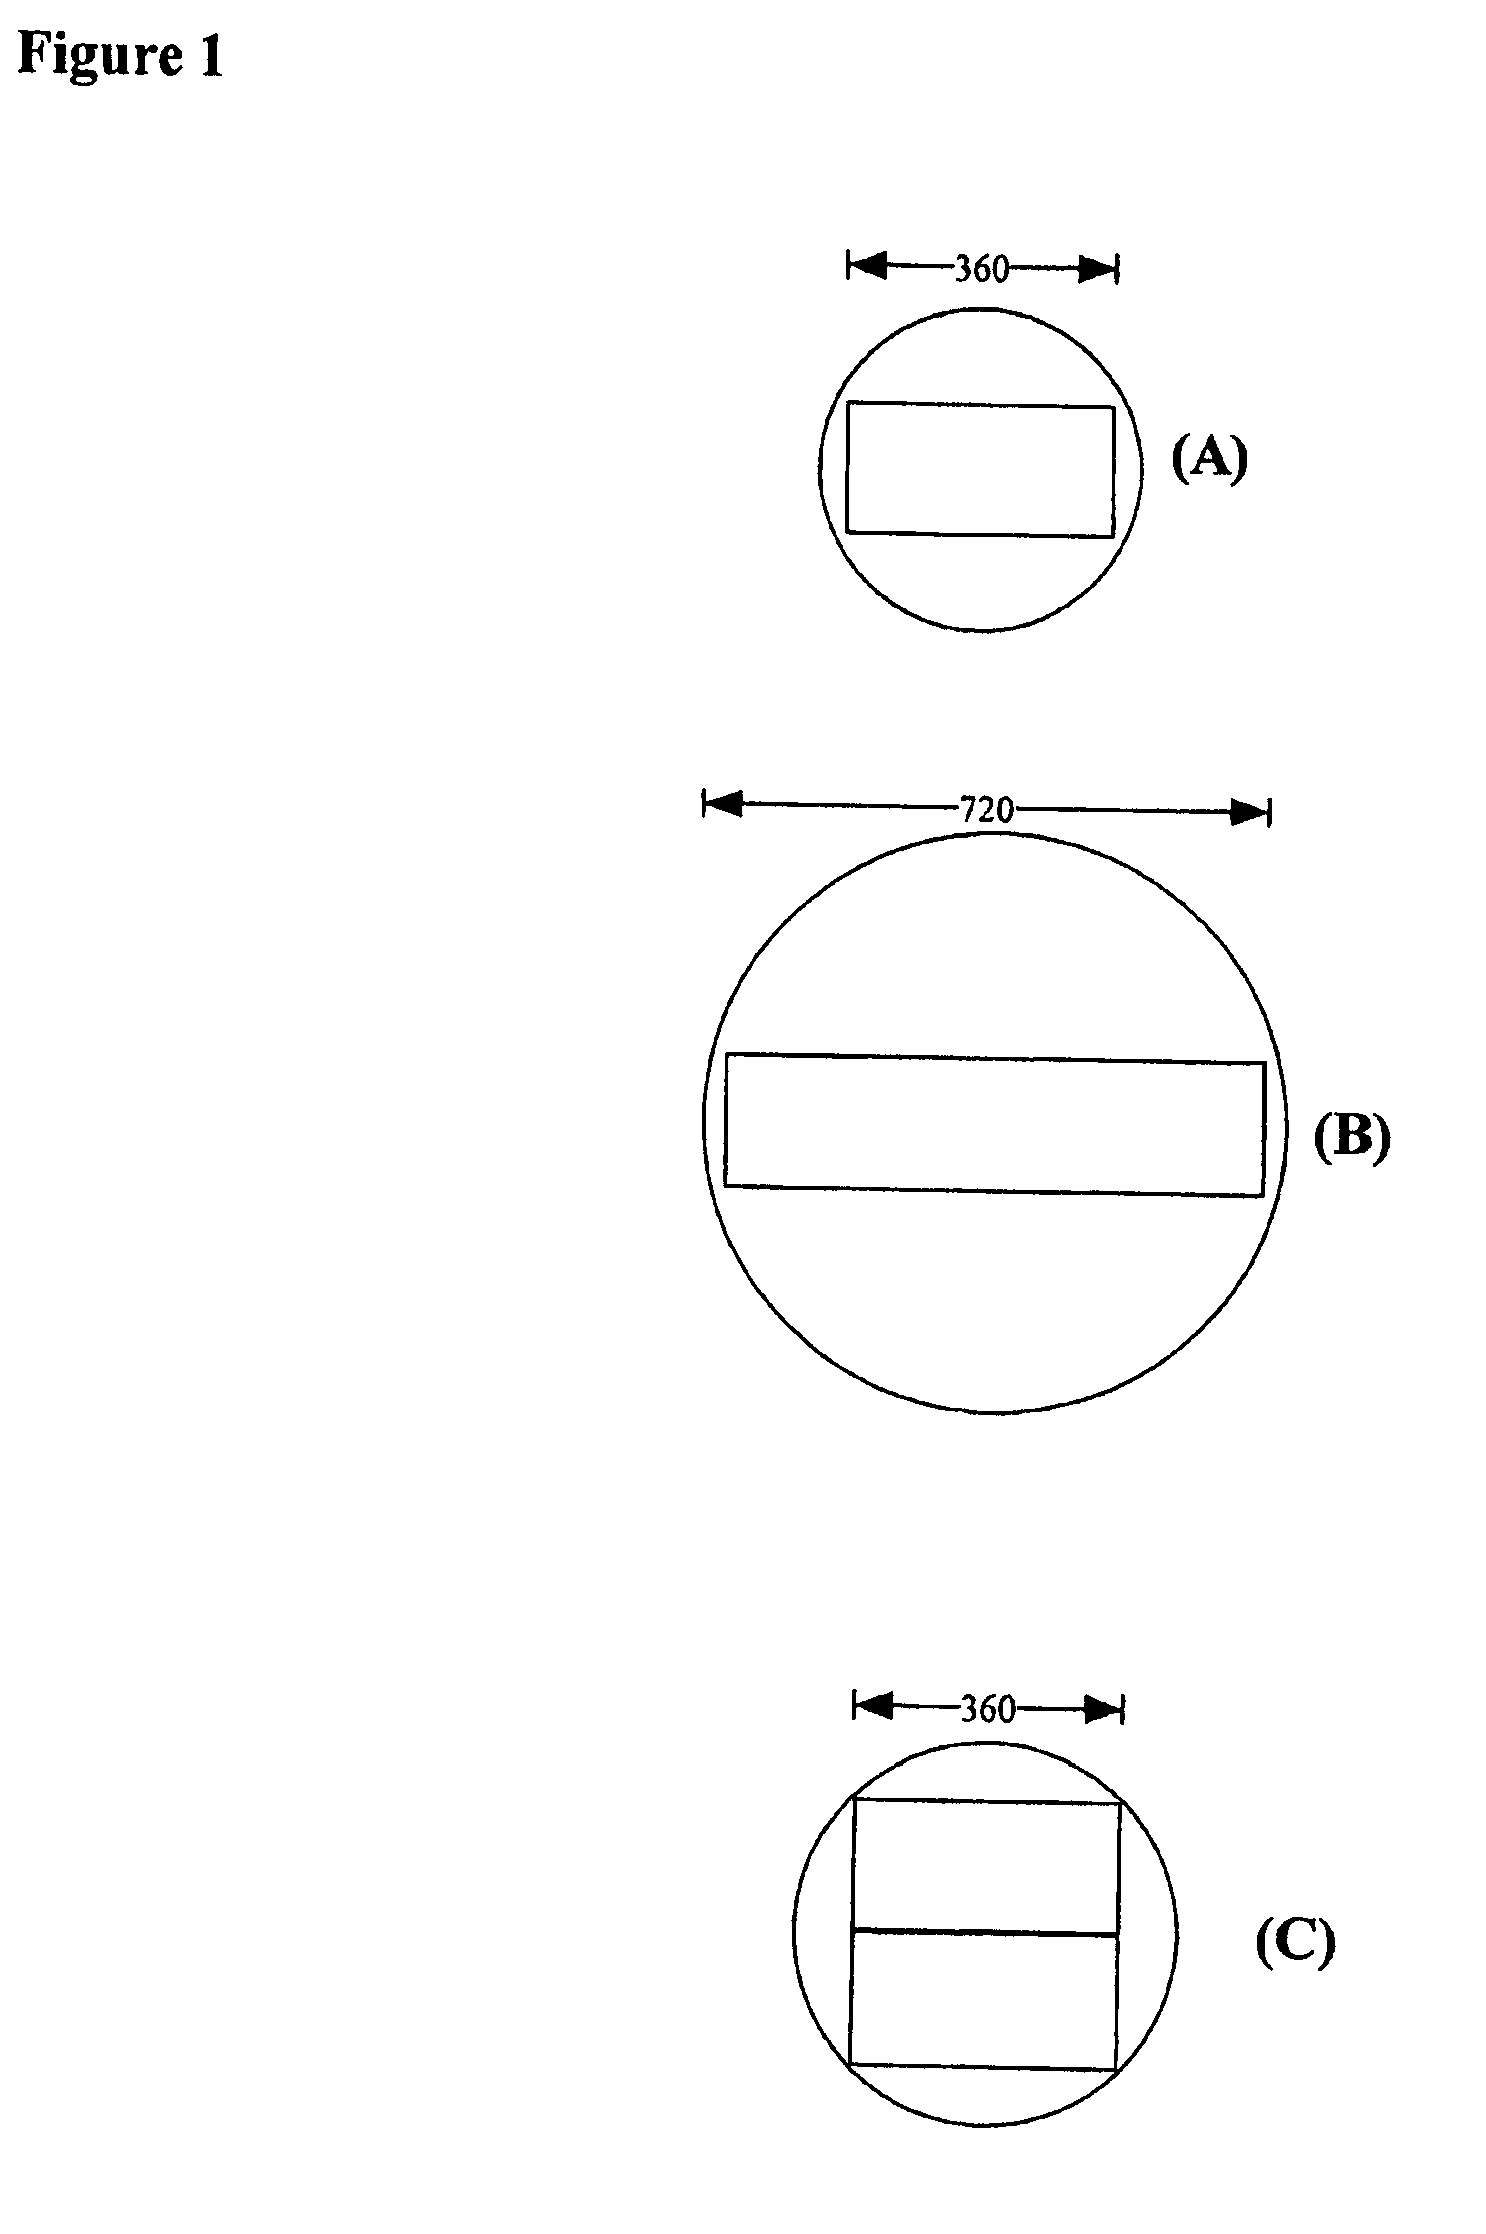 Optically multiplexed imaging system and methods of operation